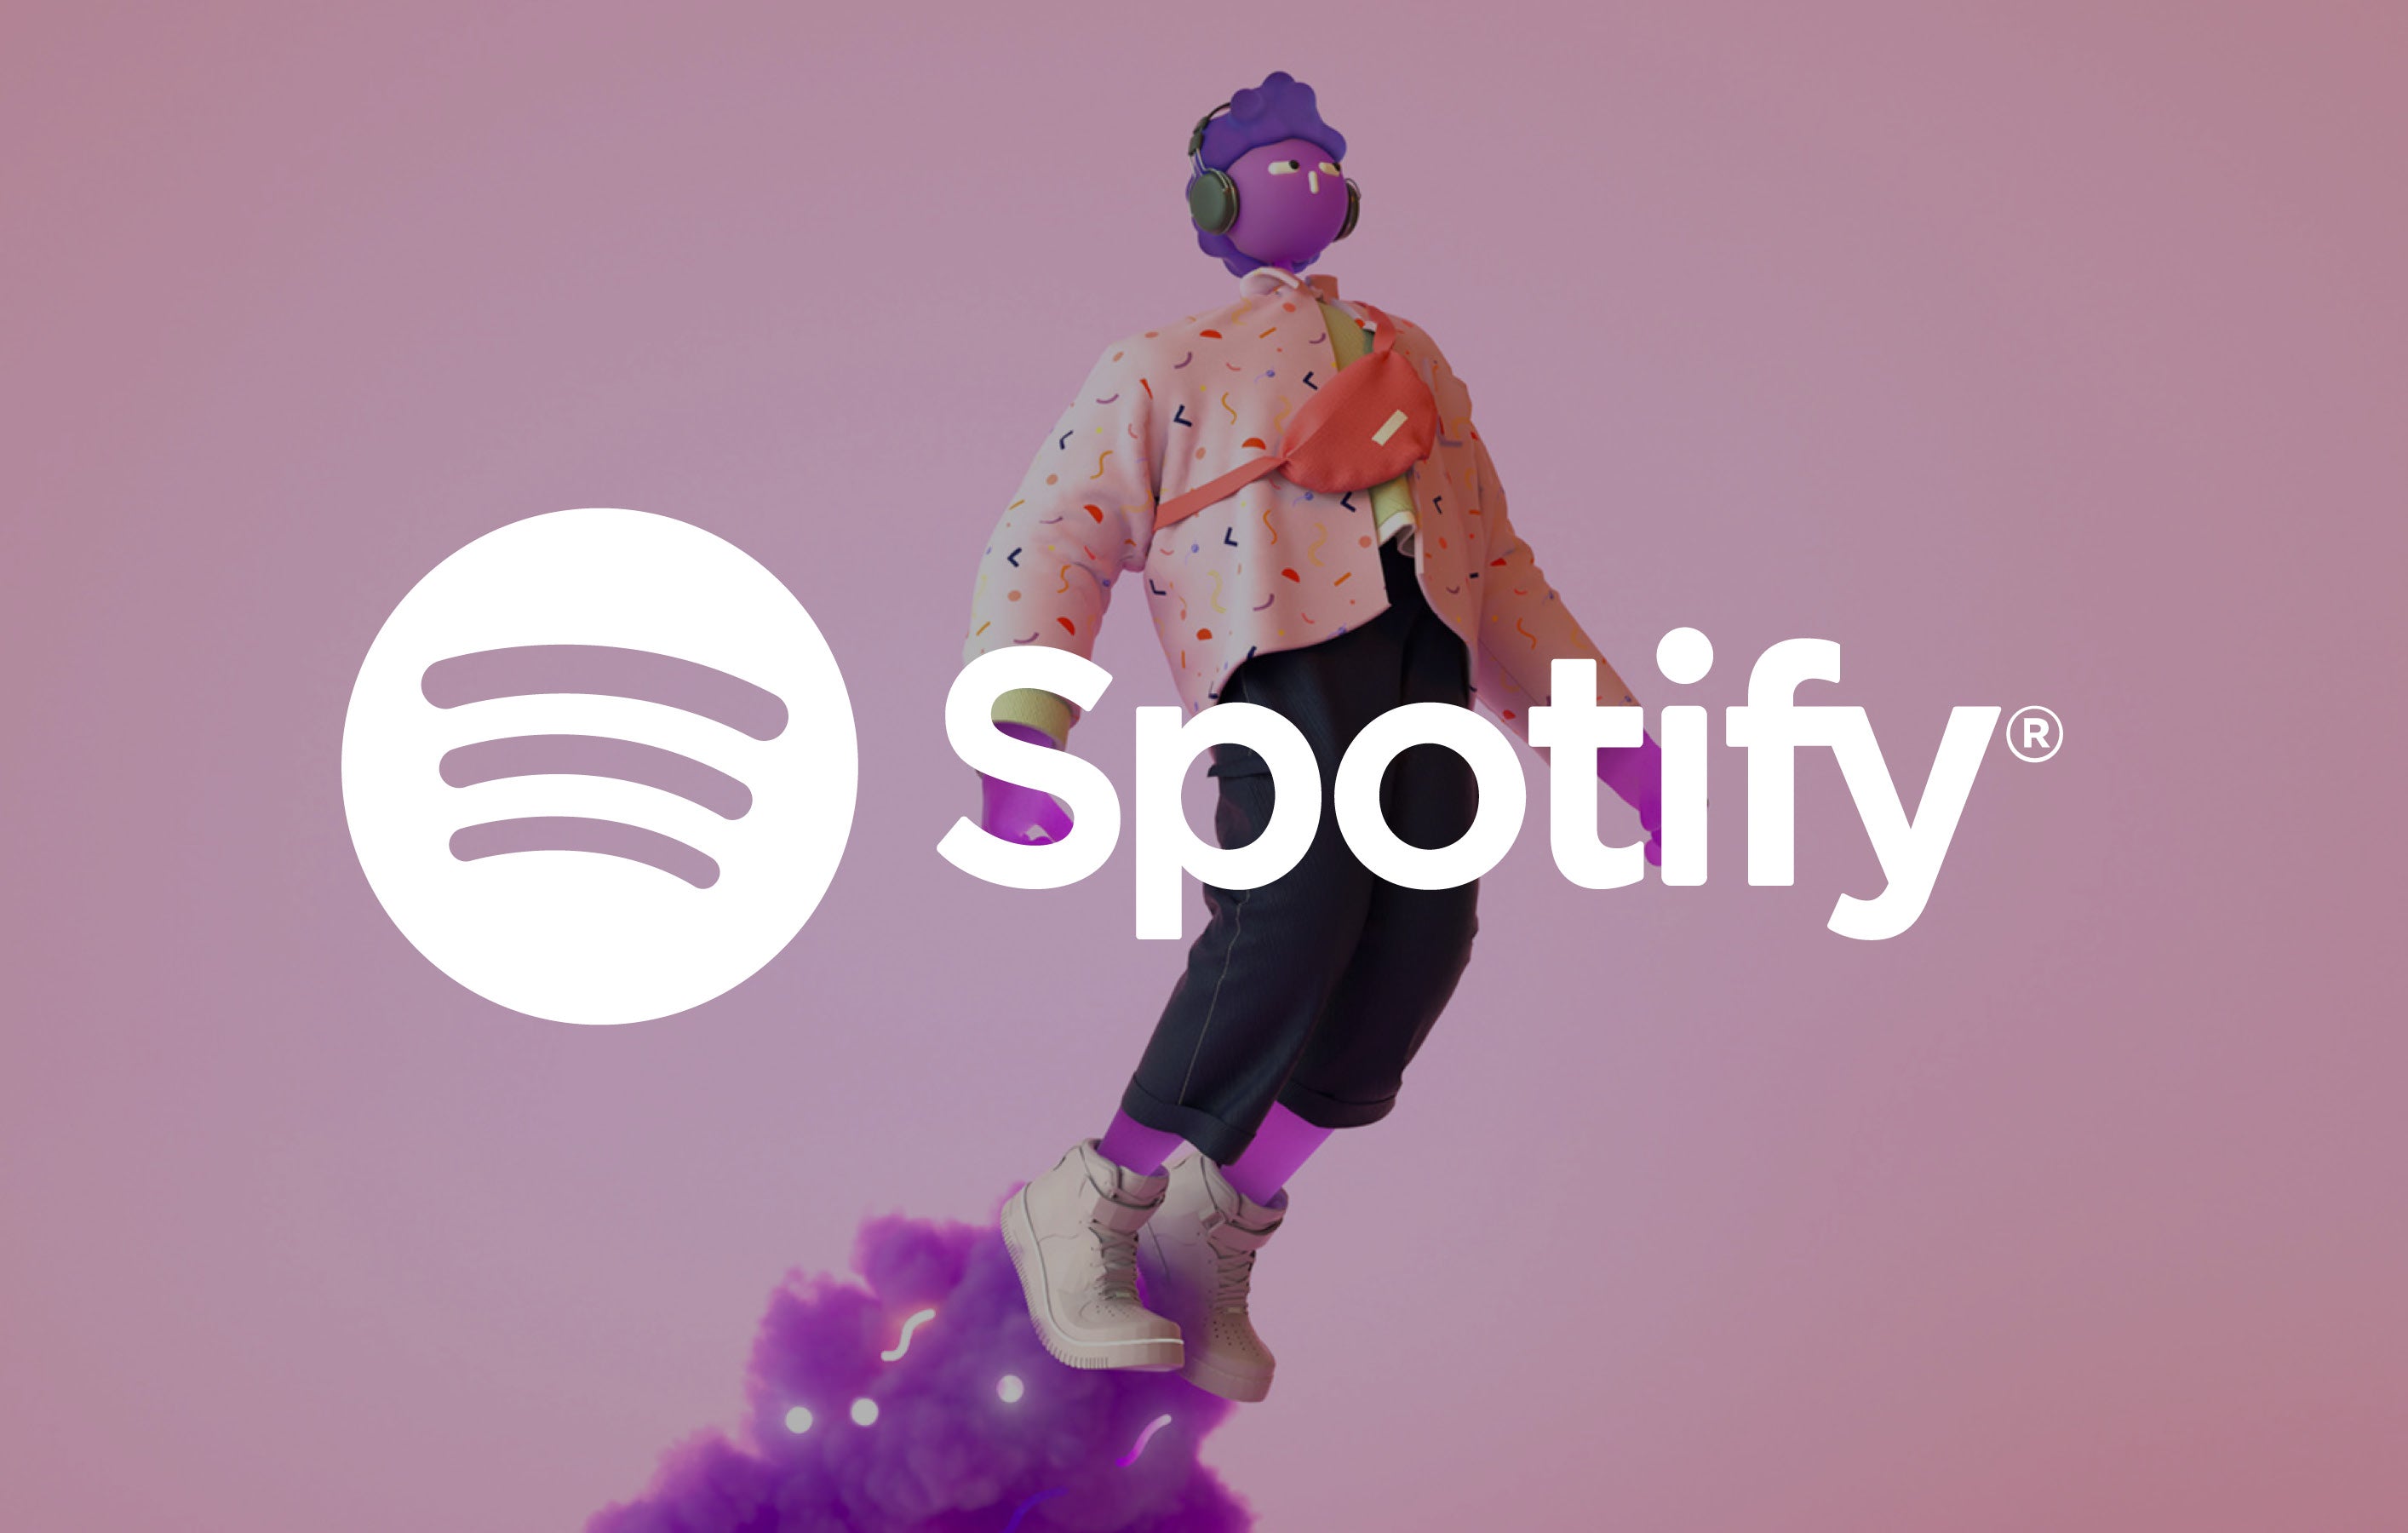 Spotify Premium 1 Month Music Gift Card (Delivery by eMail